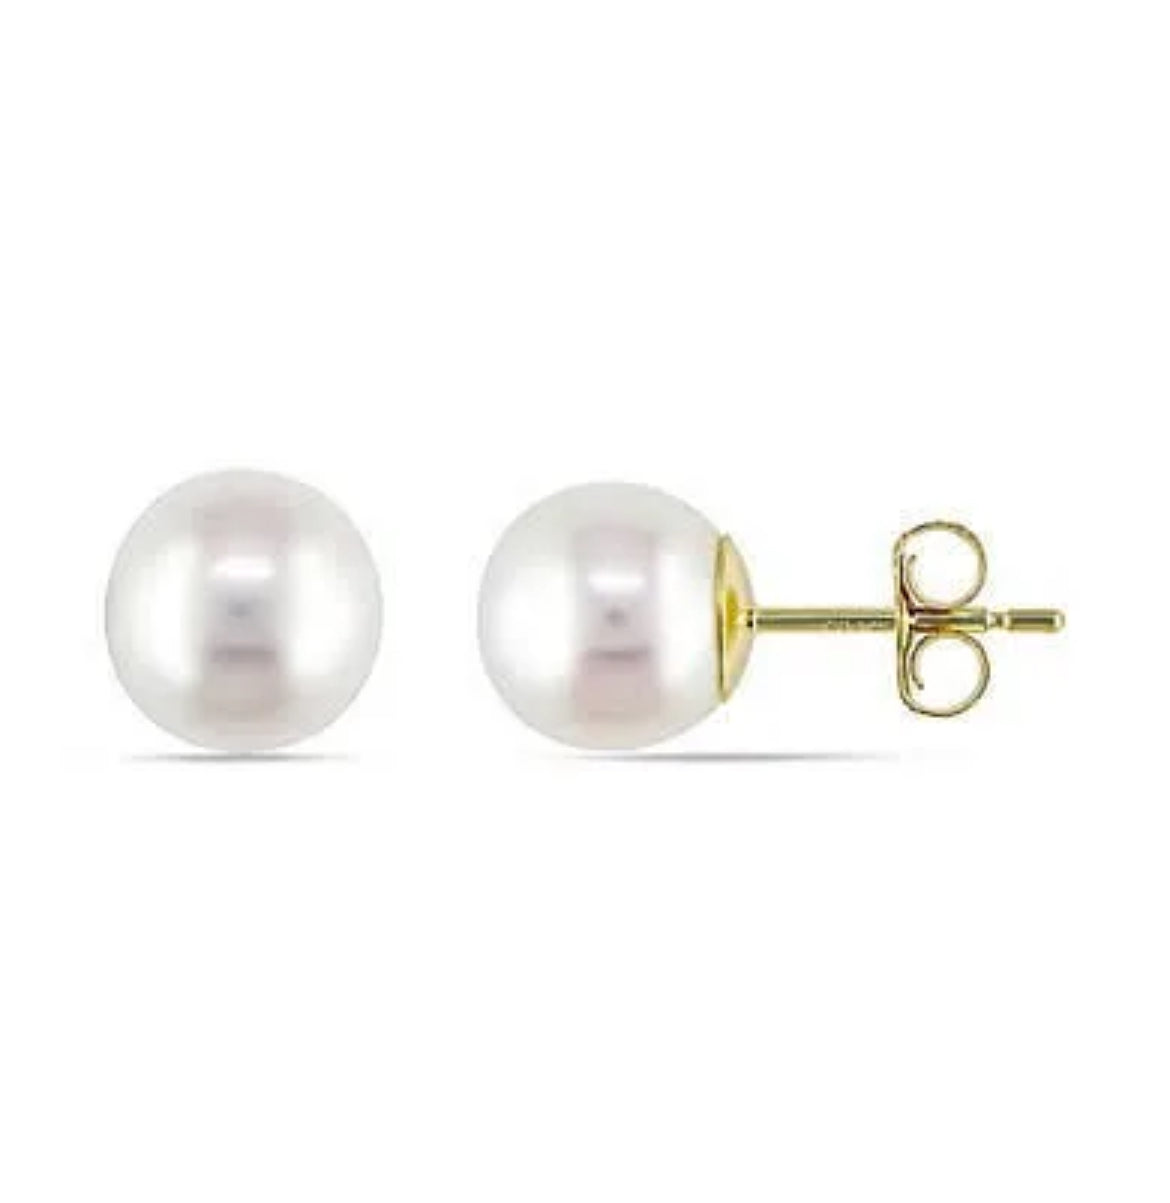 These cultured pearl stud earrings showcase 7.50 mm pearls with great luster and color. Set in 14k yellow gold with secure friction backs, these classic earrings add a touch of sophistication to any outfit. Enjoy the elegance and timeless beauty of cultured pearls.